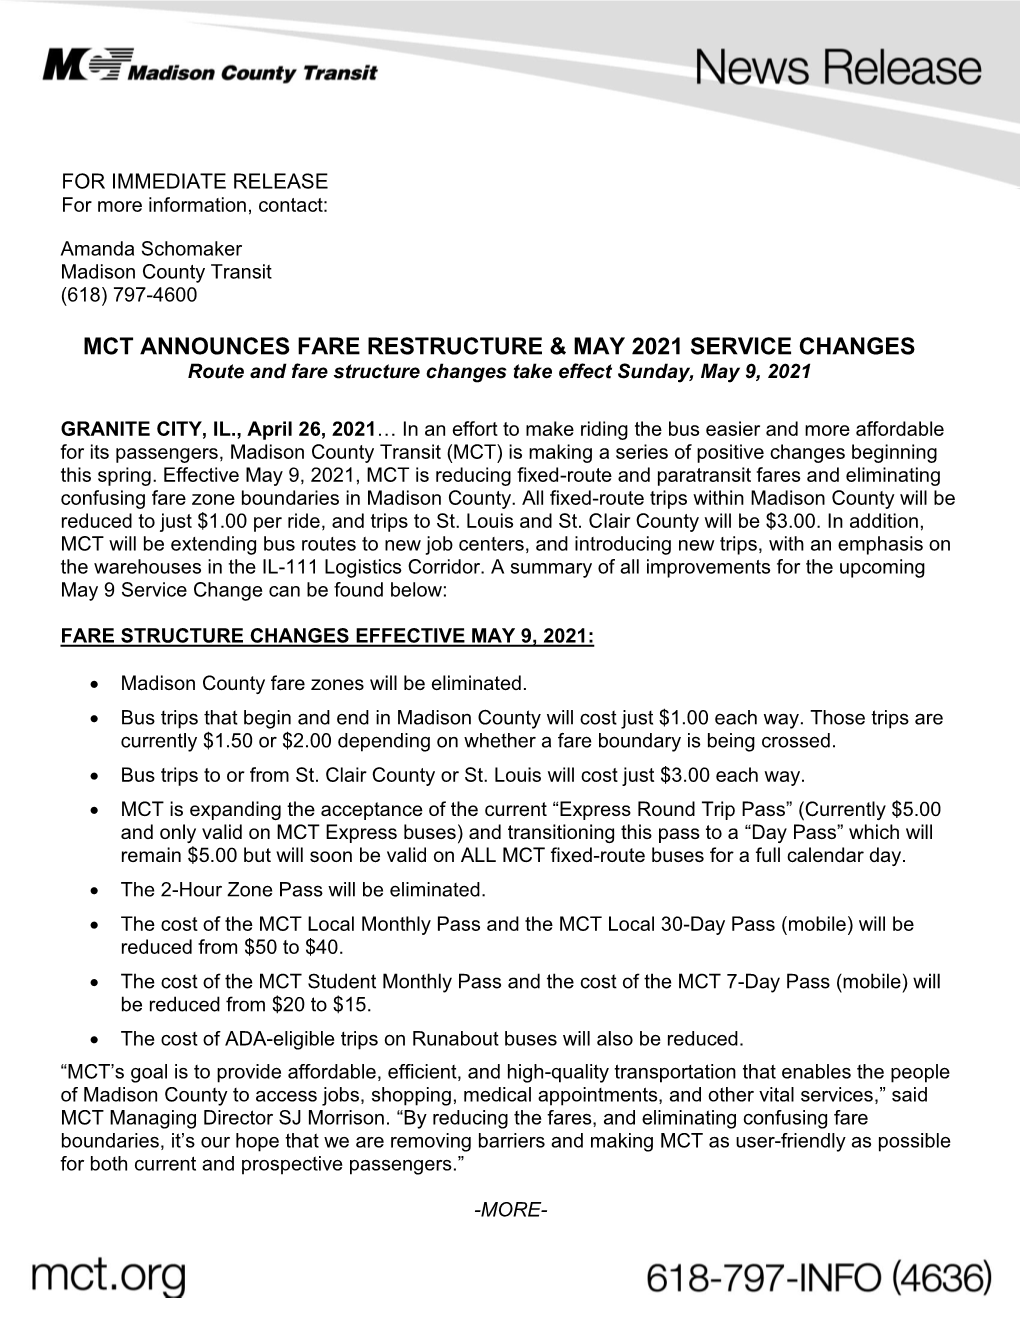 Mct Announces Fare Restructure & May 2021 Service Changes